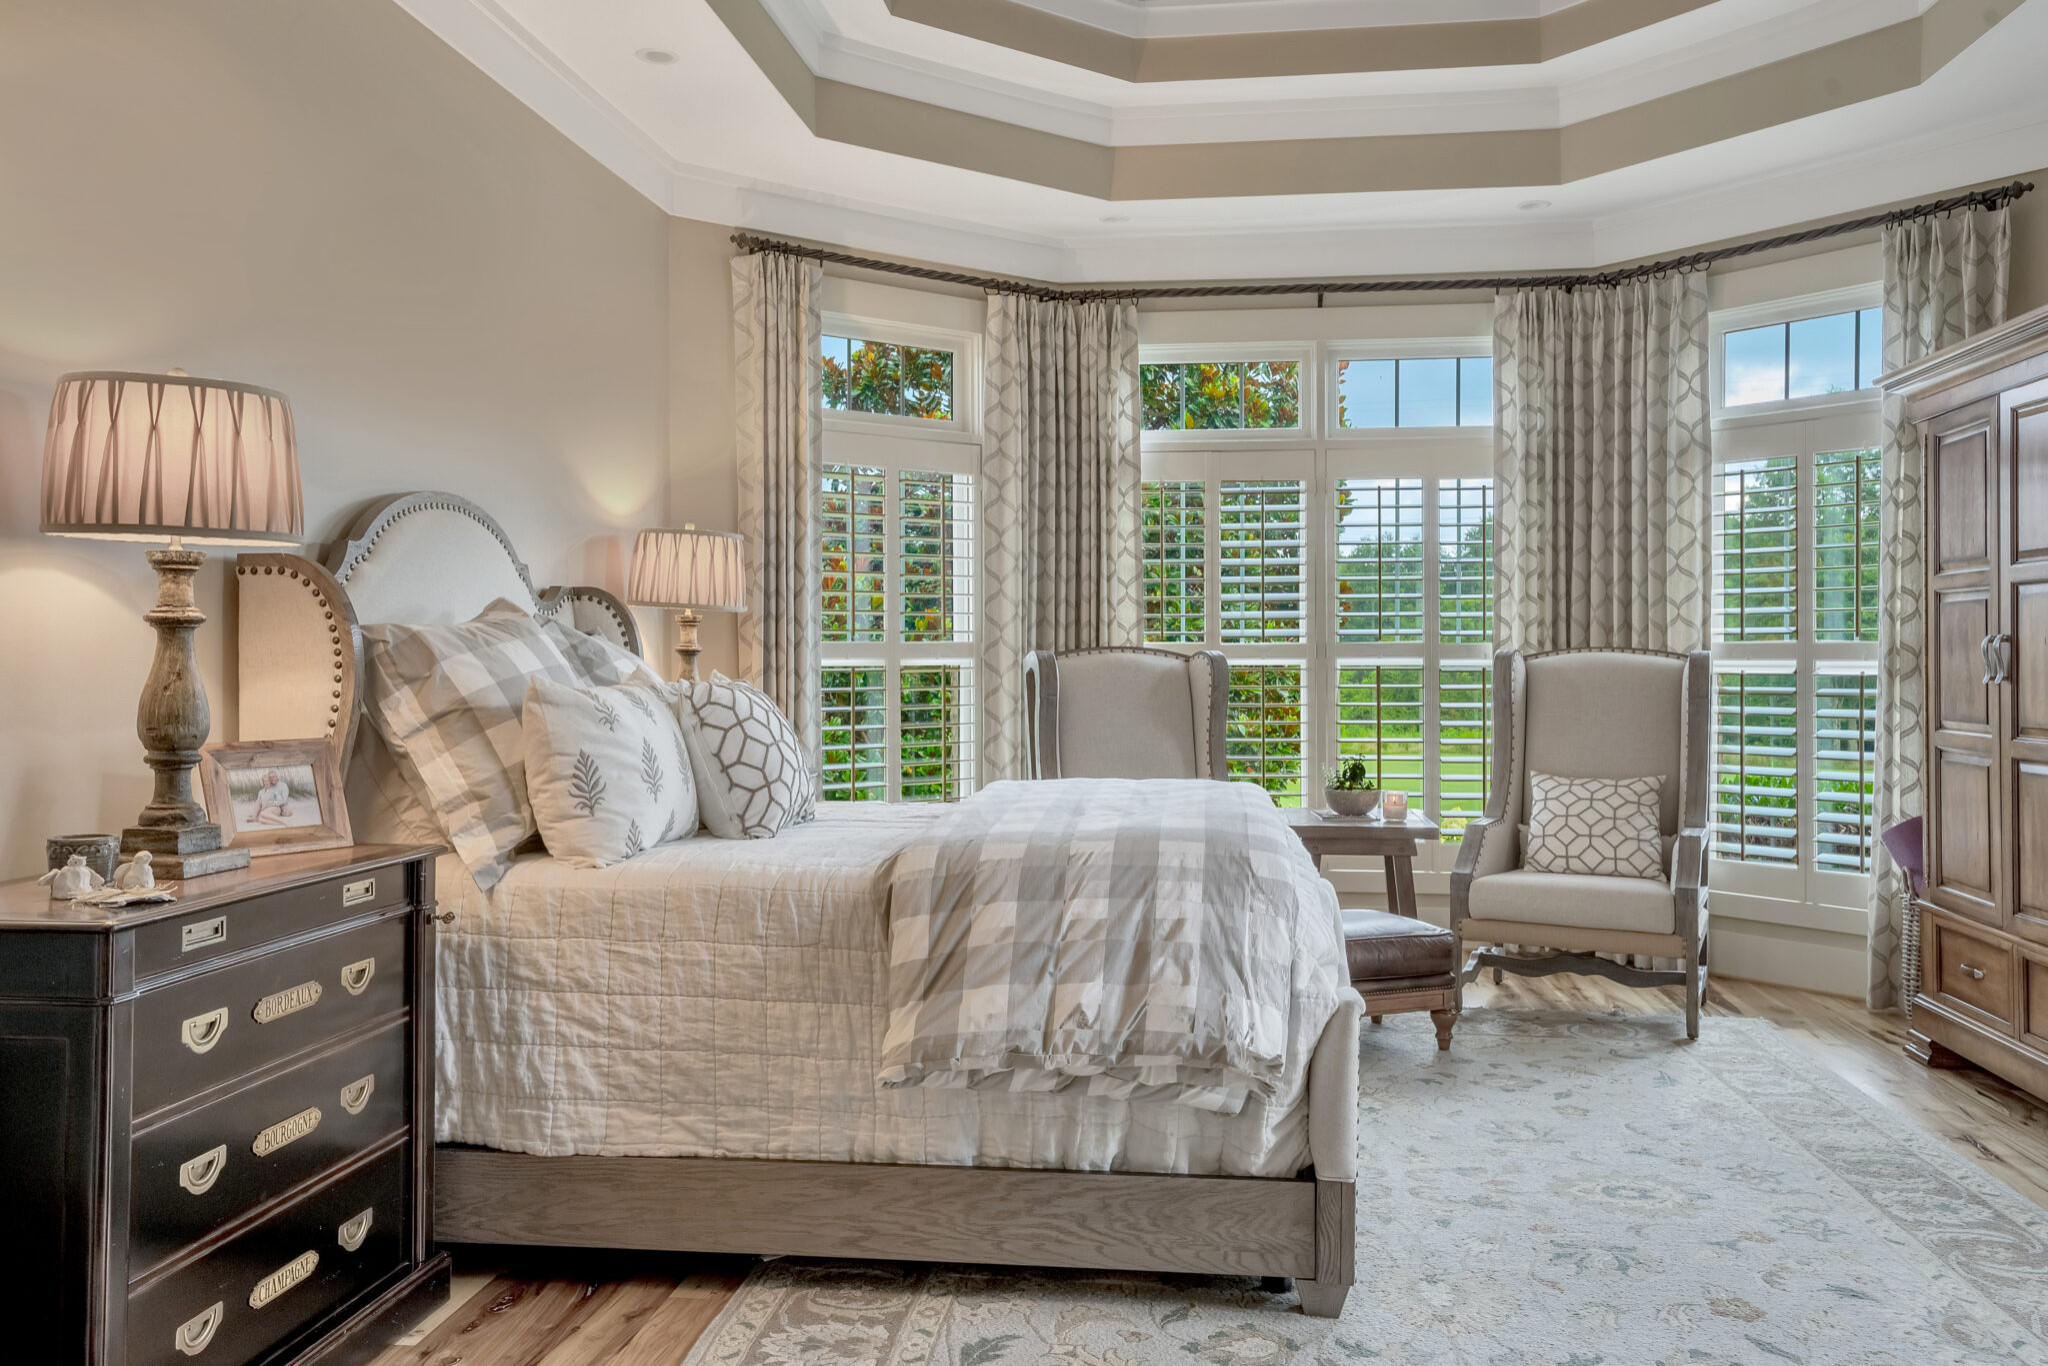 Transitional Master Bedroom-Tray Ceiling -Use of Warm Neutrals-Cumming Ga.